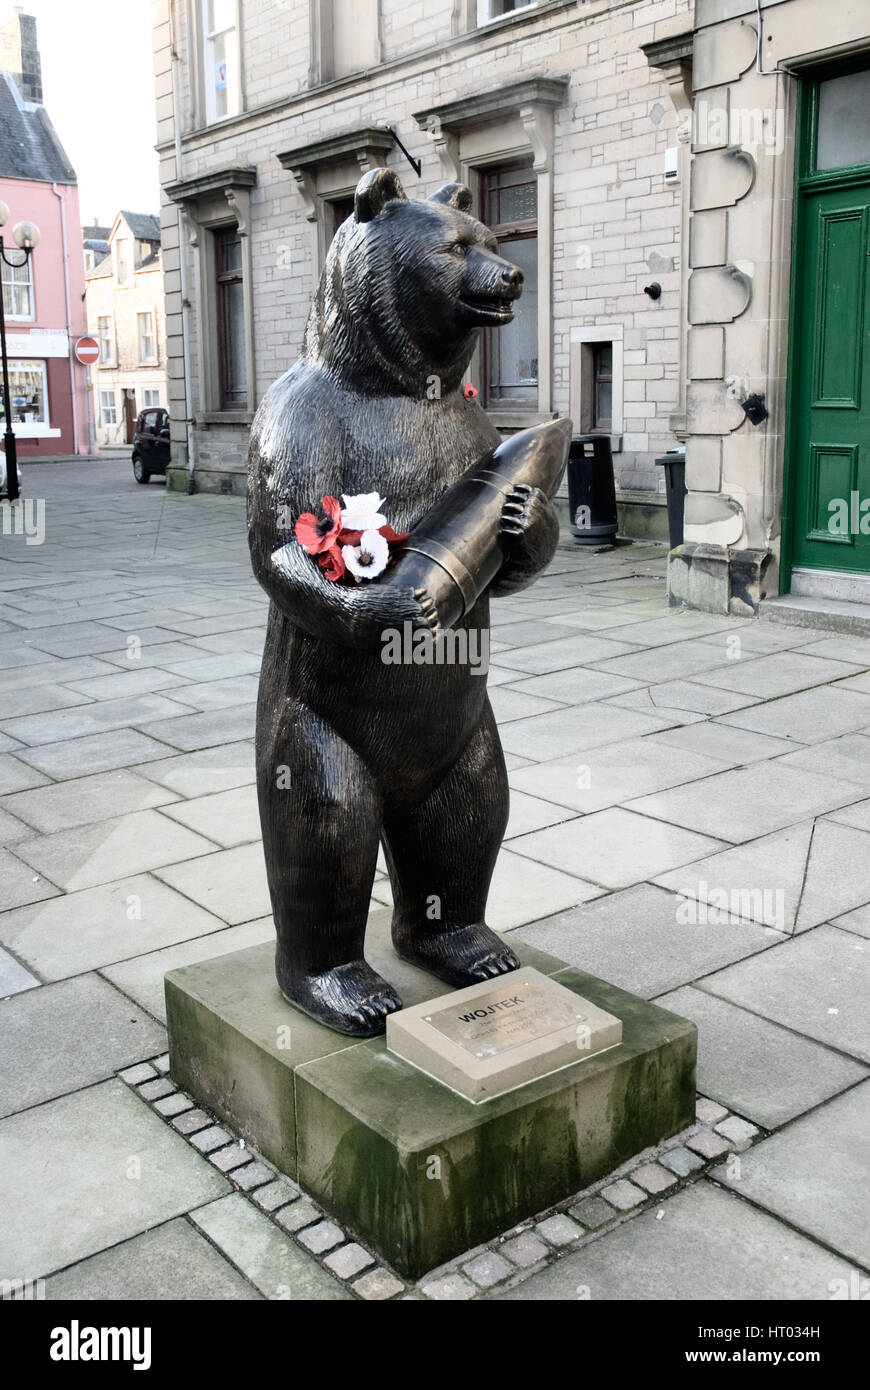 Statue of Wojtek, the soldier bear, gifted by the people of Zagan, Poland to Duns in the Scottish Borders, April 2016. Stock Photo